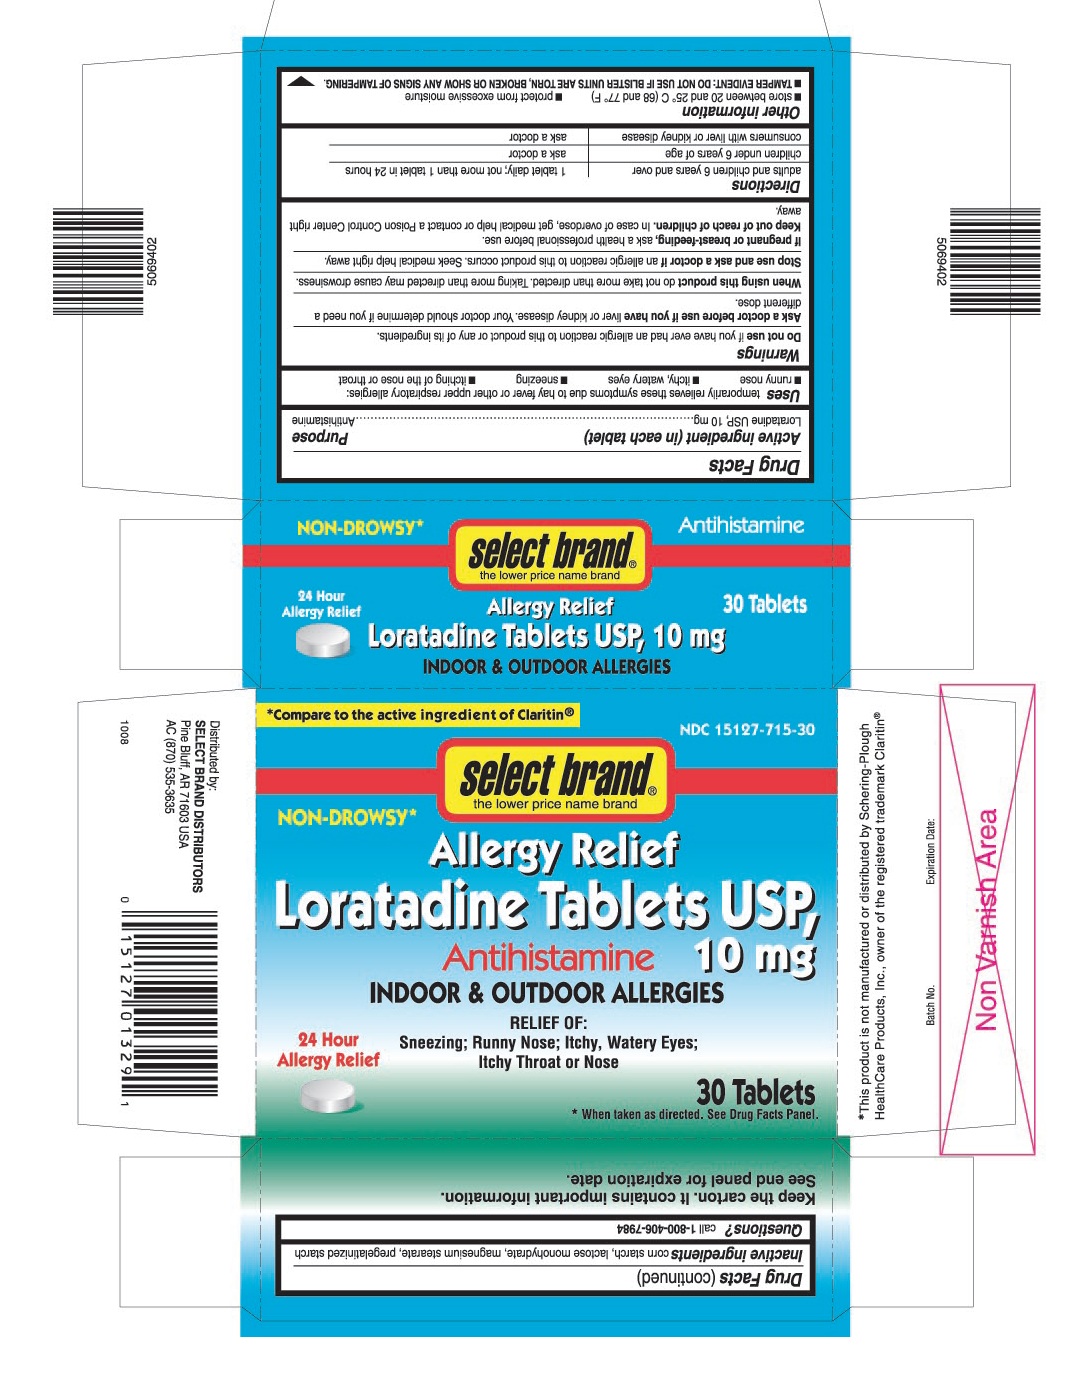 This is the 30 count blister carton label for Select Brand Loratadine tablets.